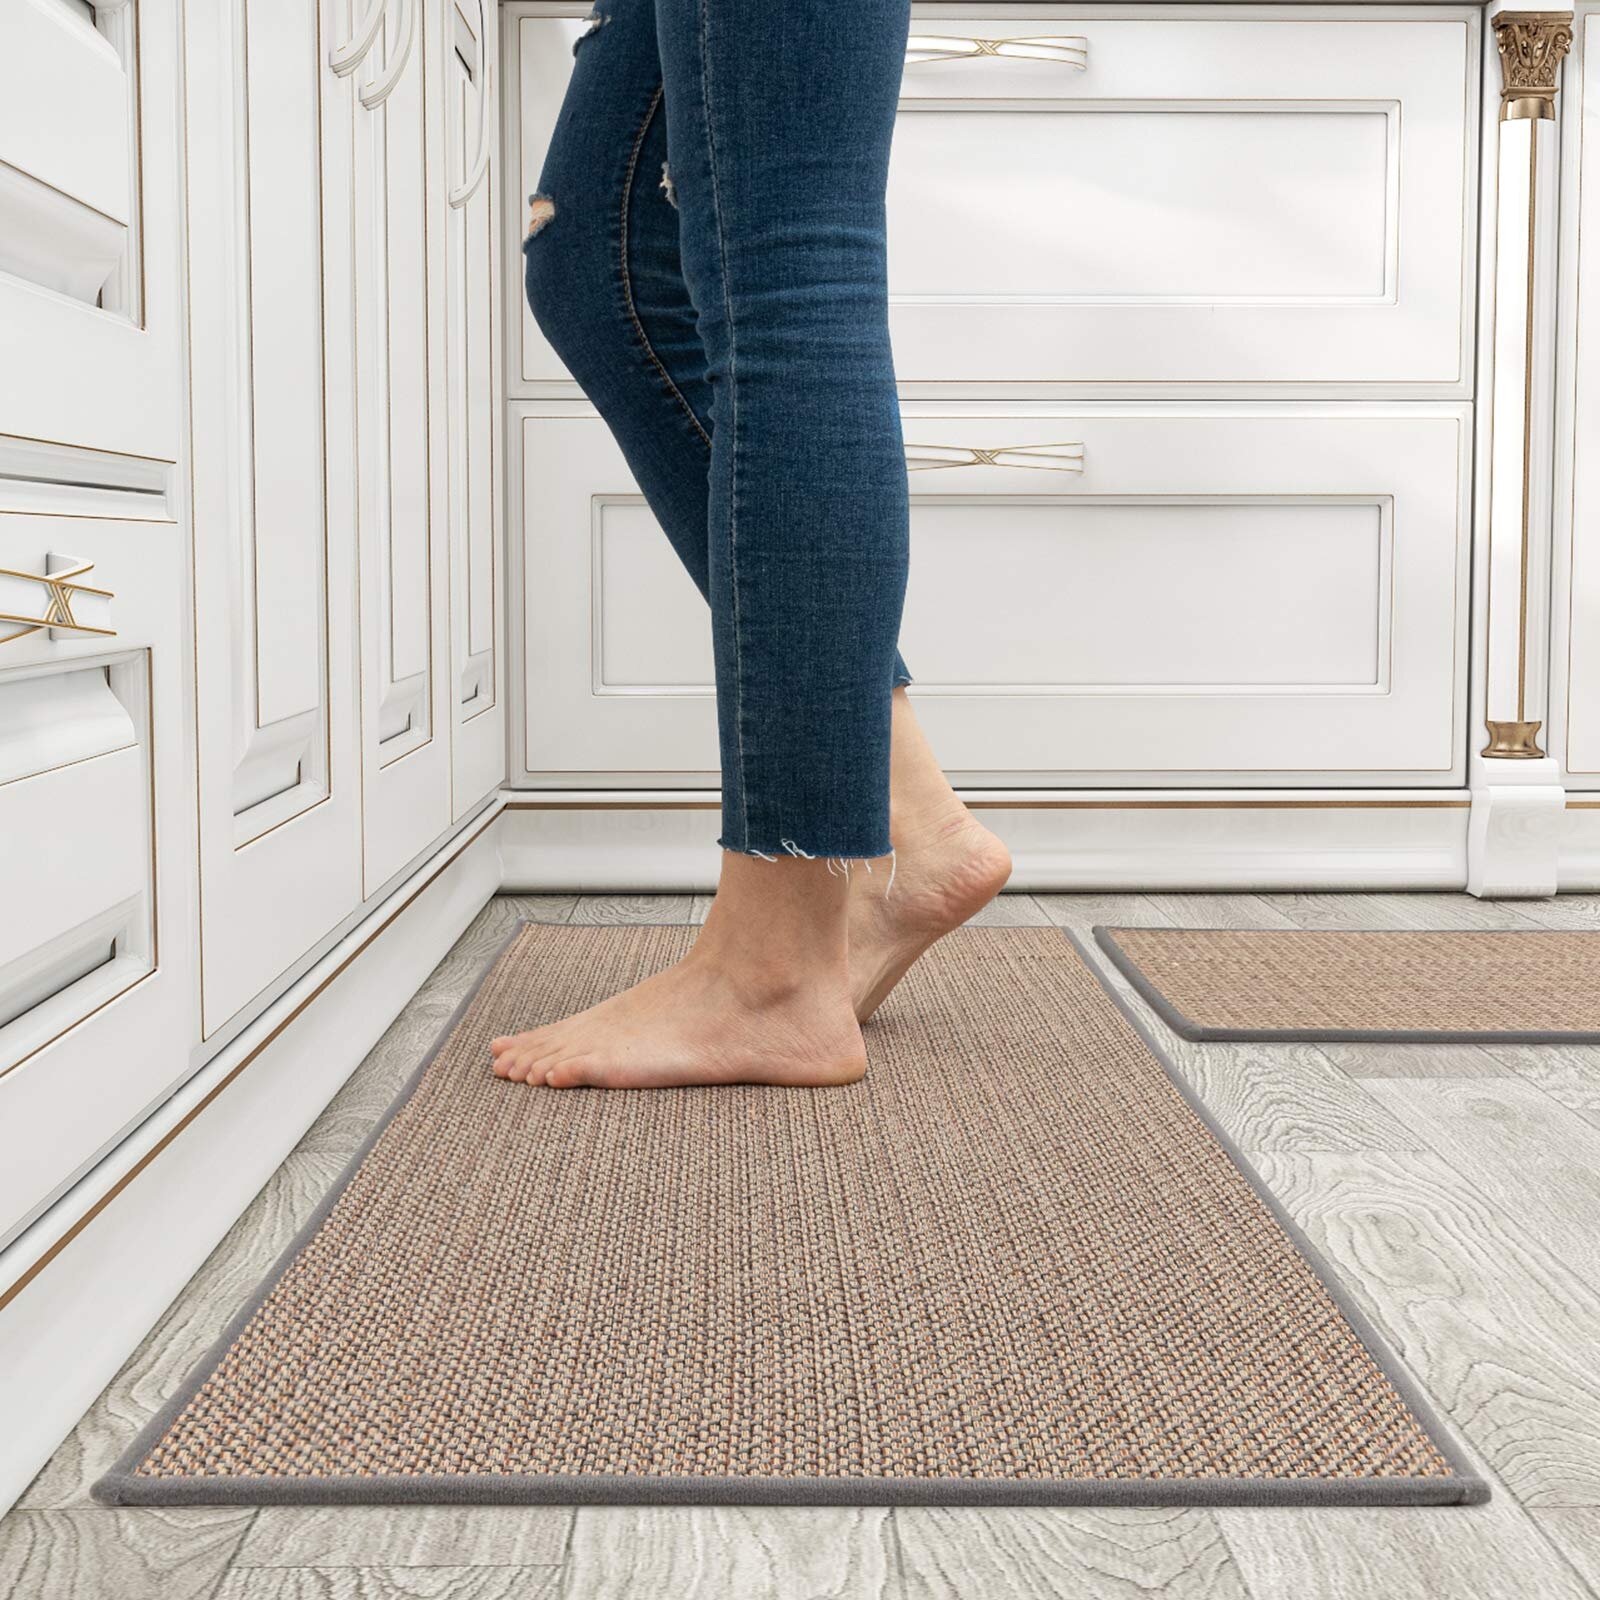 1.7' x 3.3' ALAZA Turtle Starfish Shell Striped Non Slip Kitchen Floor Mat Kitchen Rug for Entryway Hallway Bathroom Living Room Bedroom 39 x 20 inches 